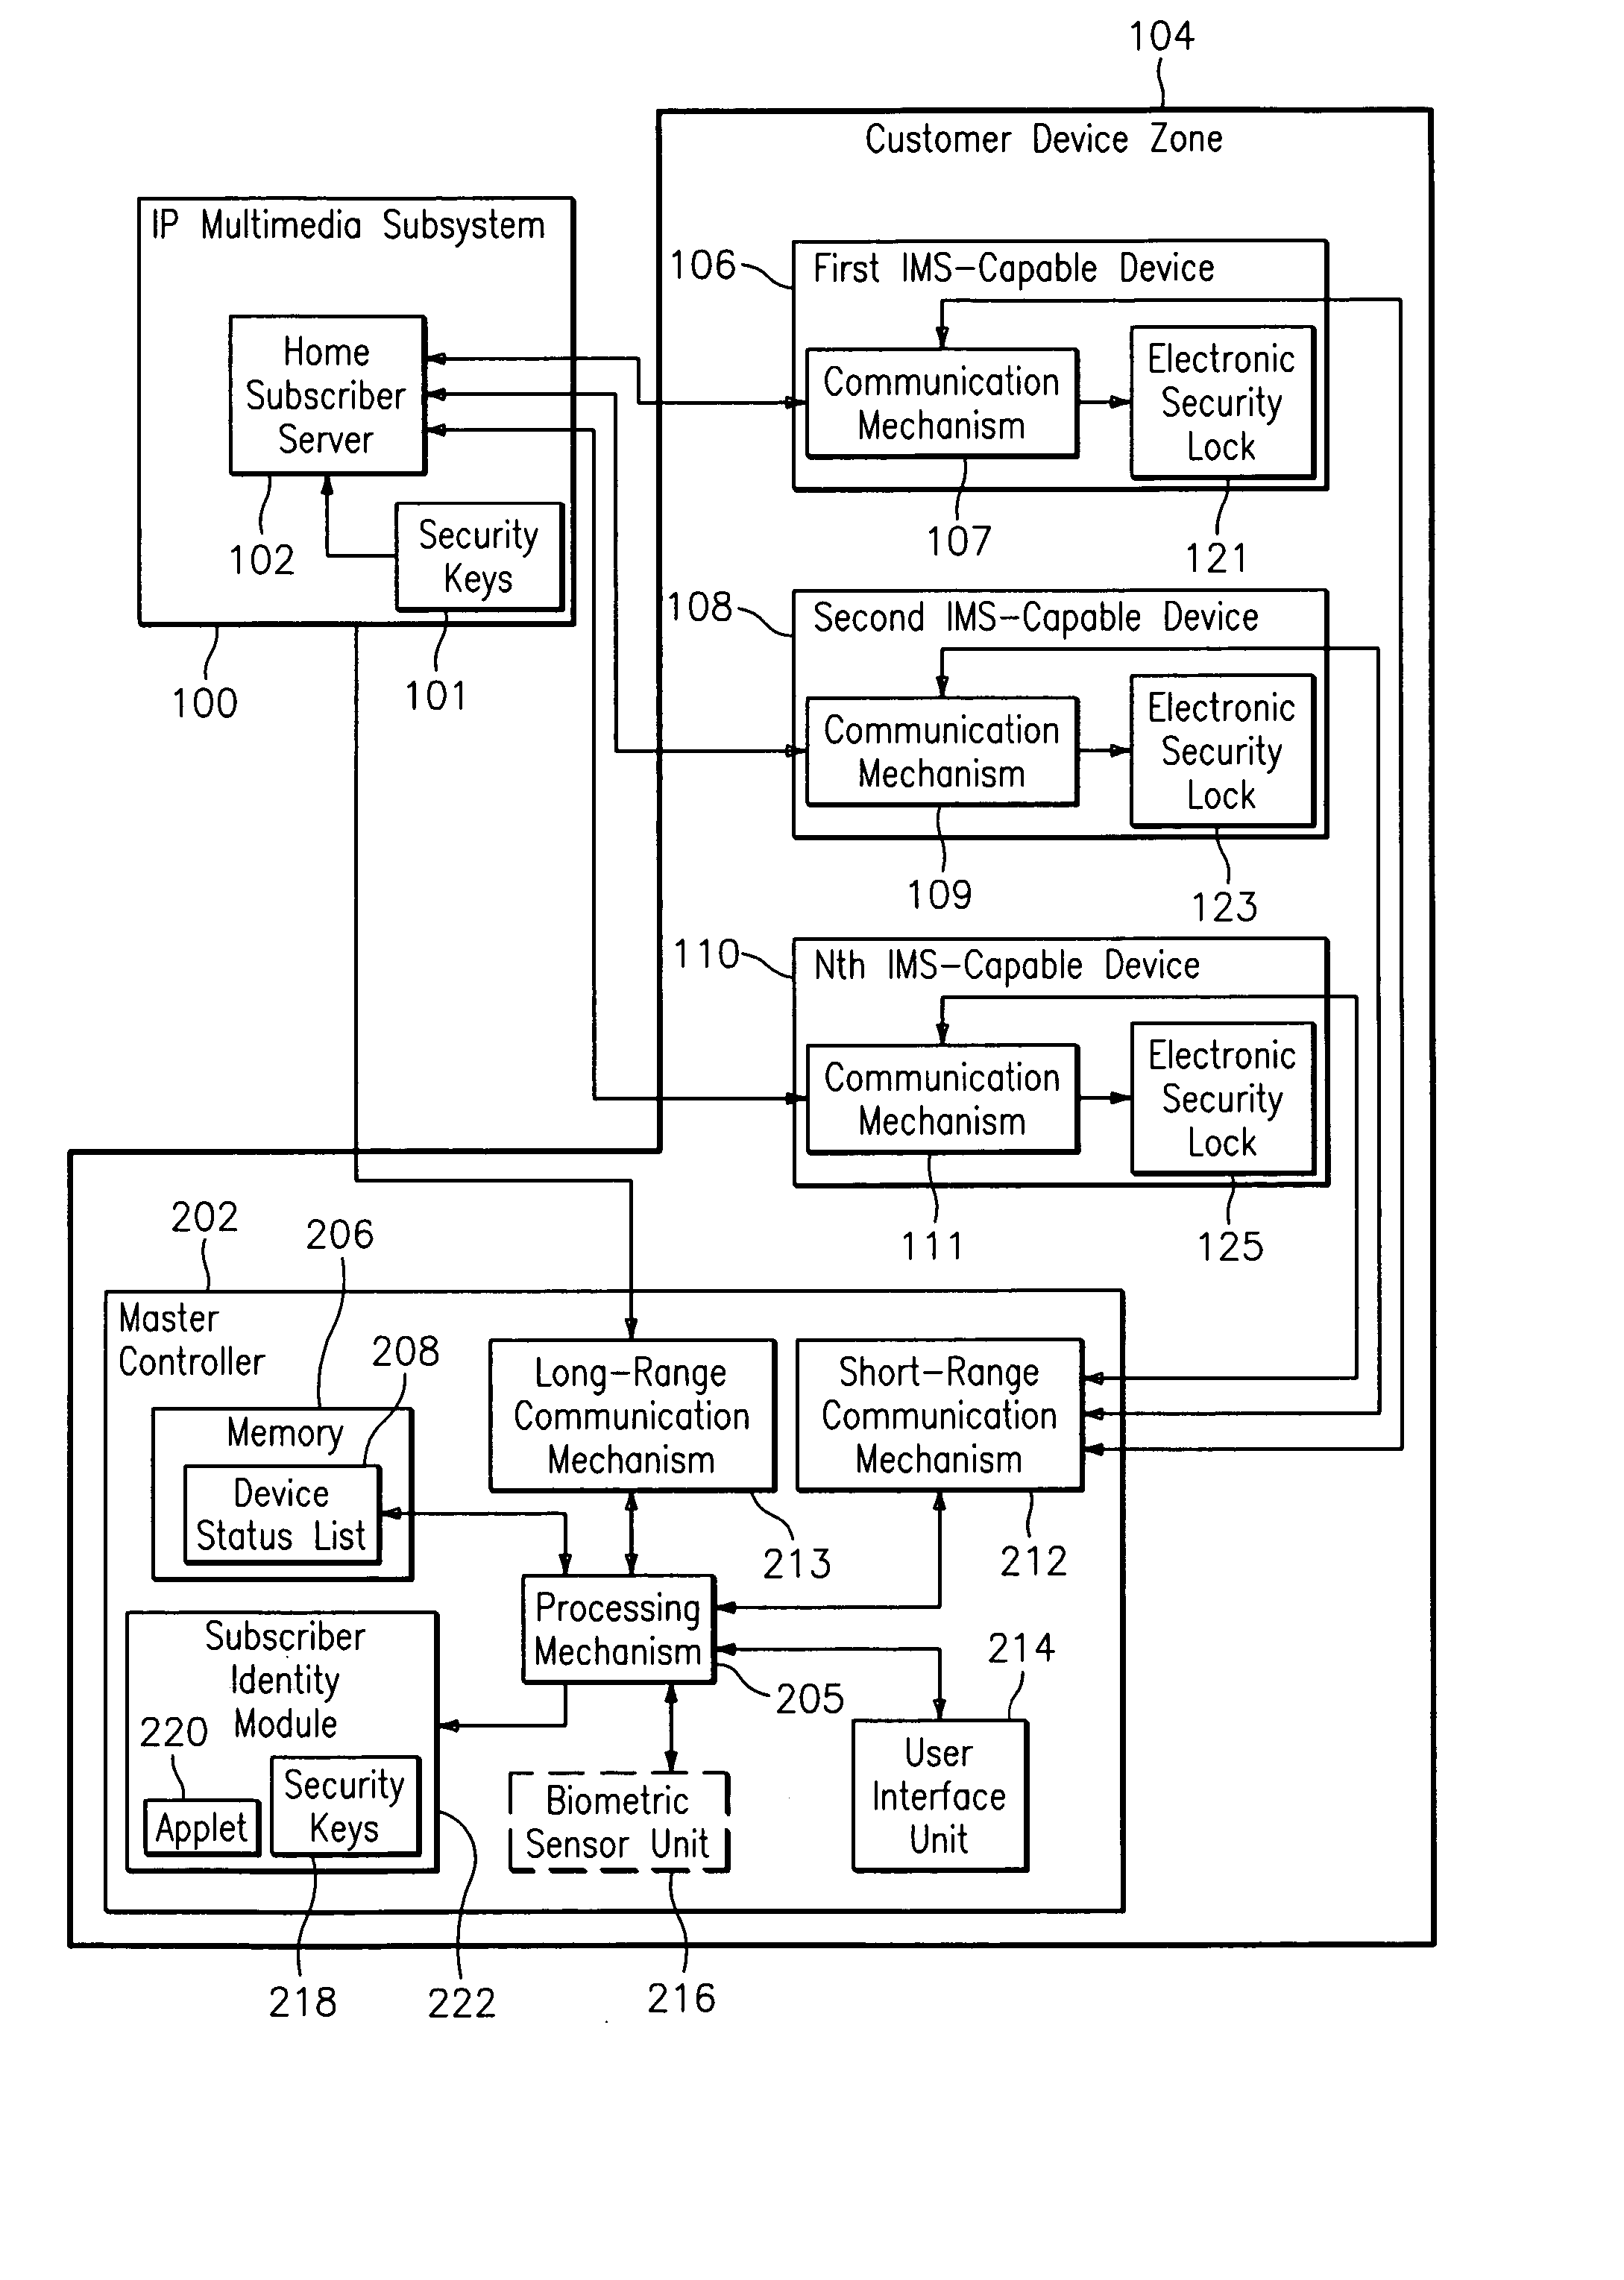 Methods, apparatus, and computer programs for automatic detection and registration of IP multimedia devices situated in a customer device zone